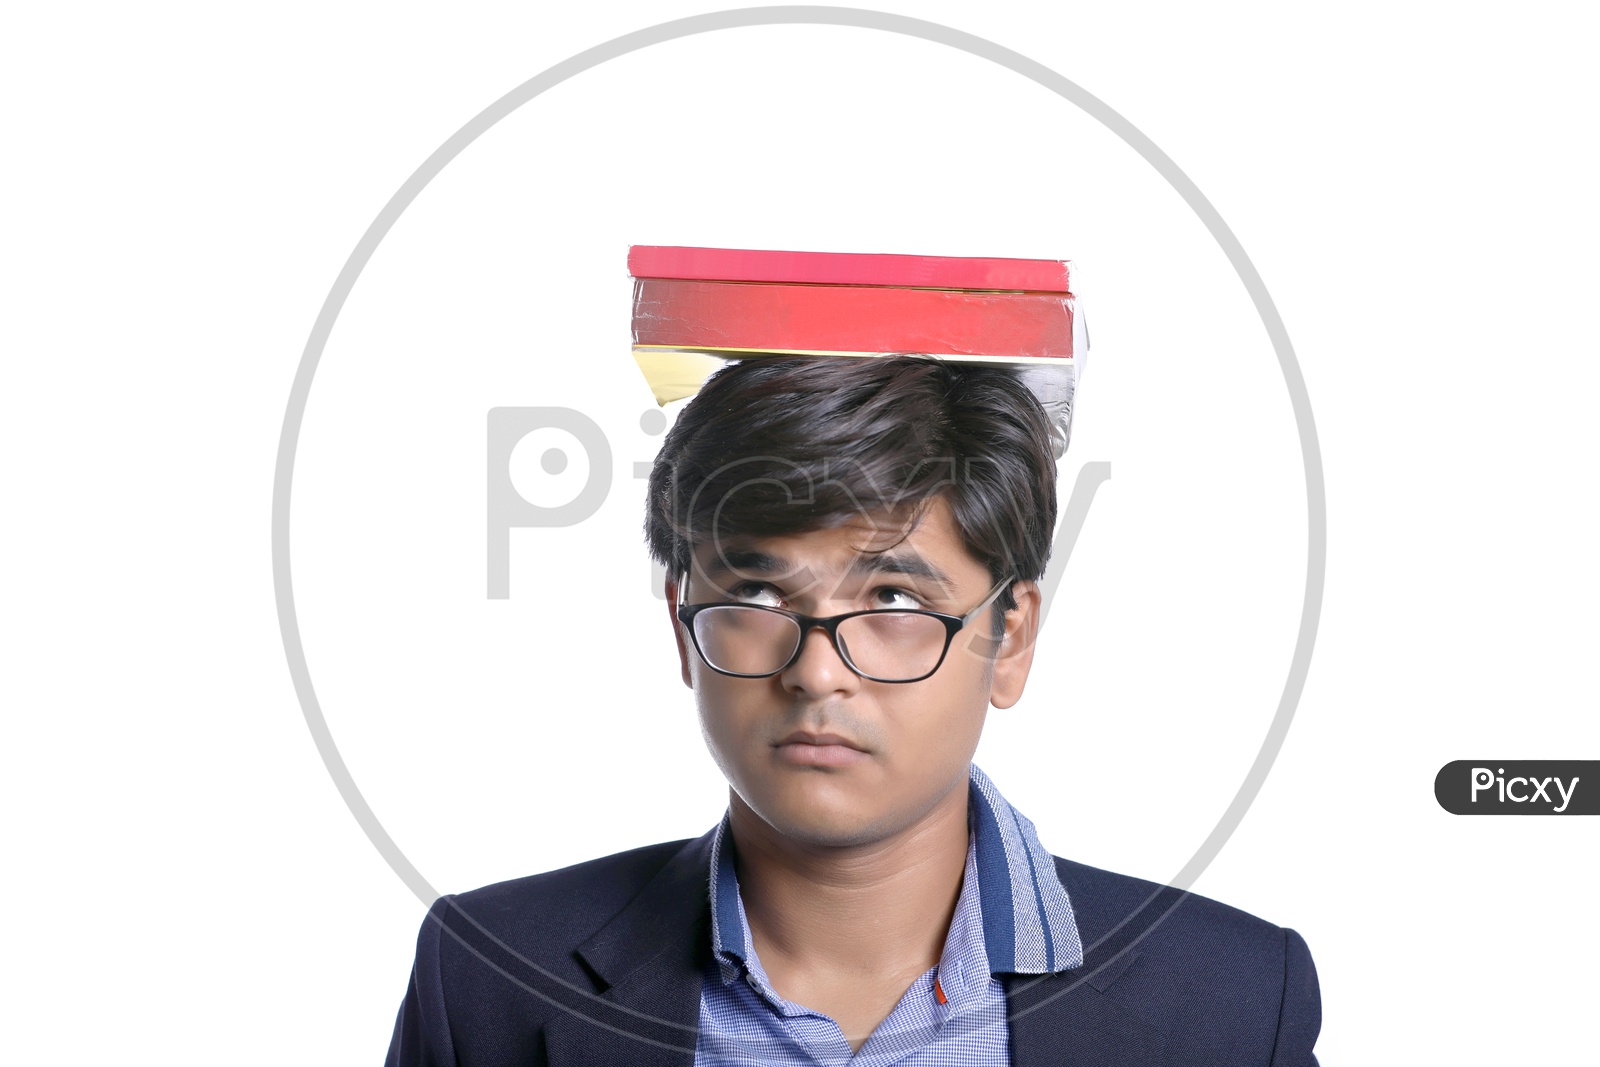 Young Indian College Student with Books, Indian Male Model on White Background